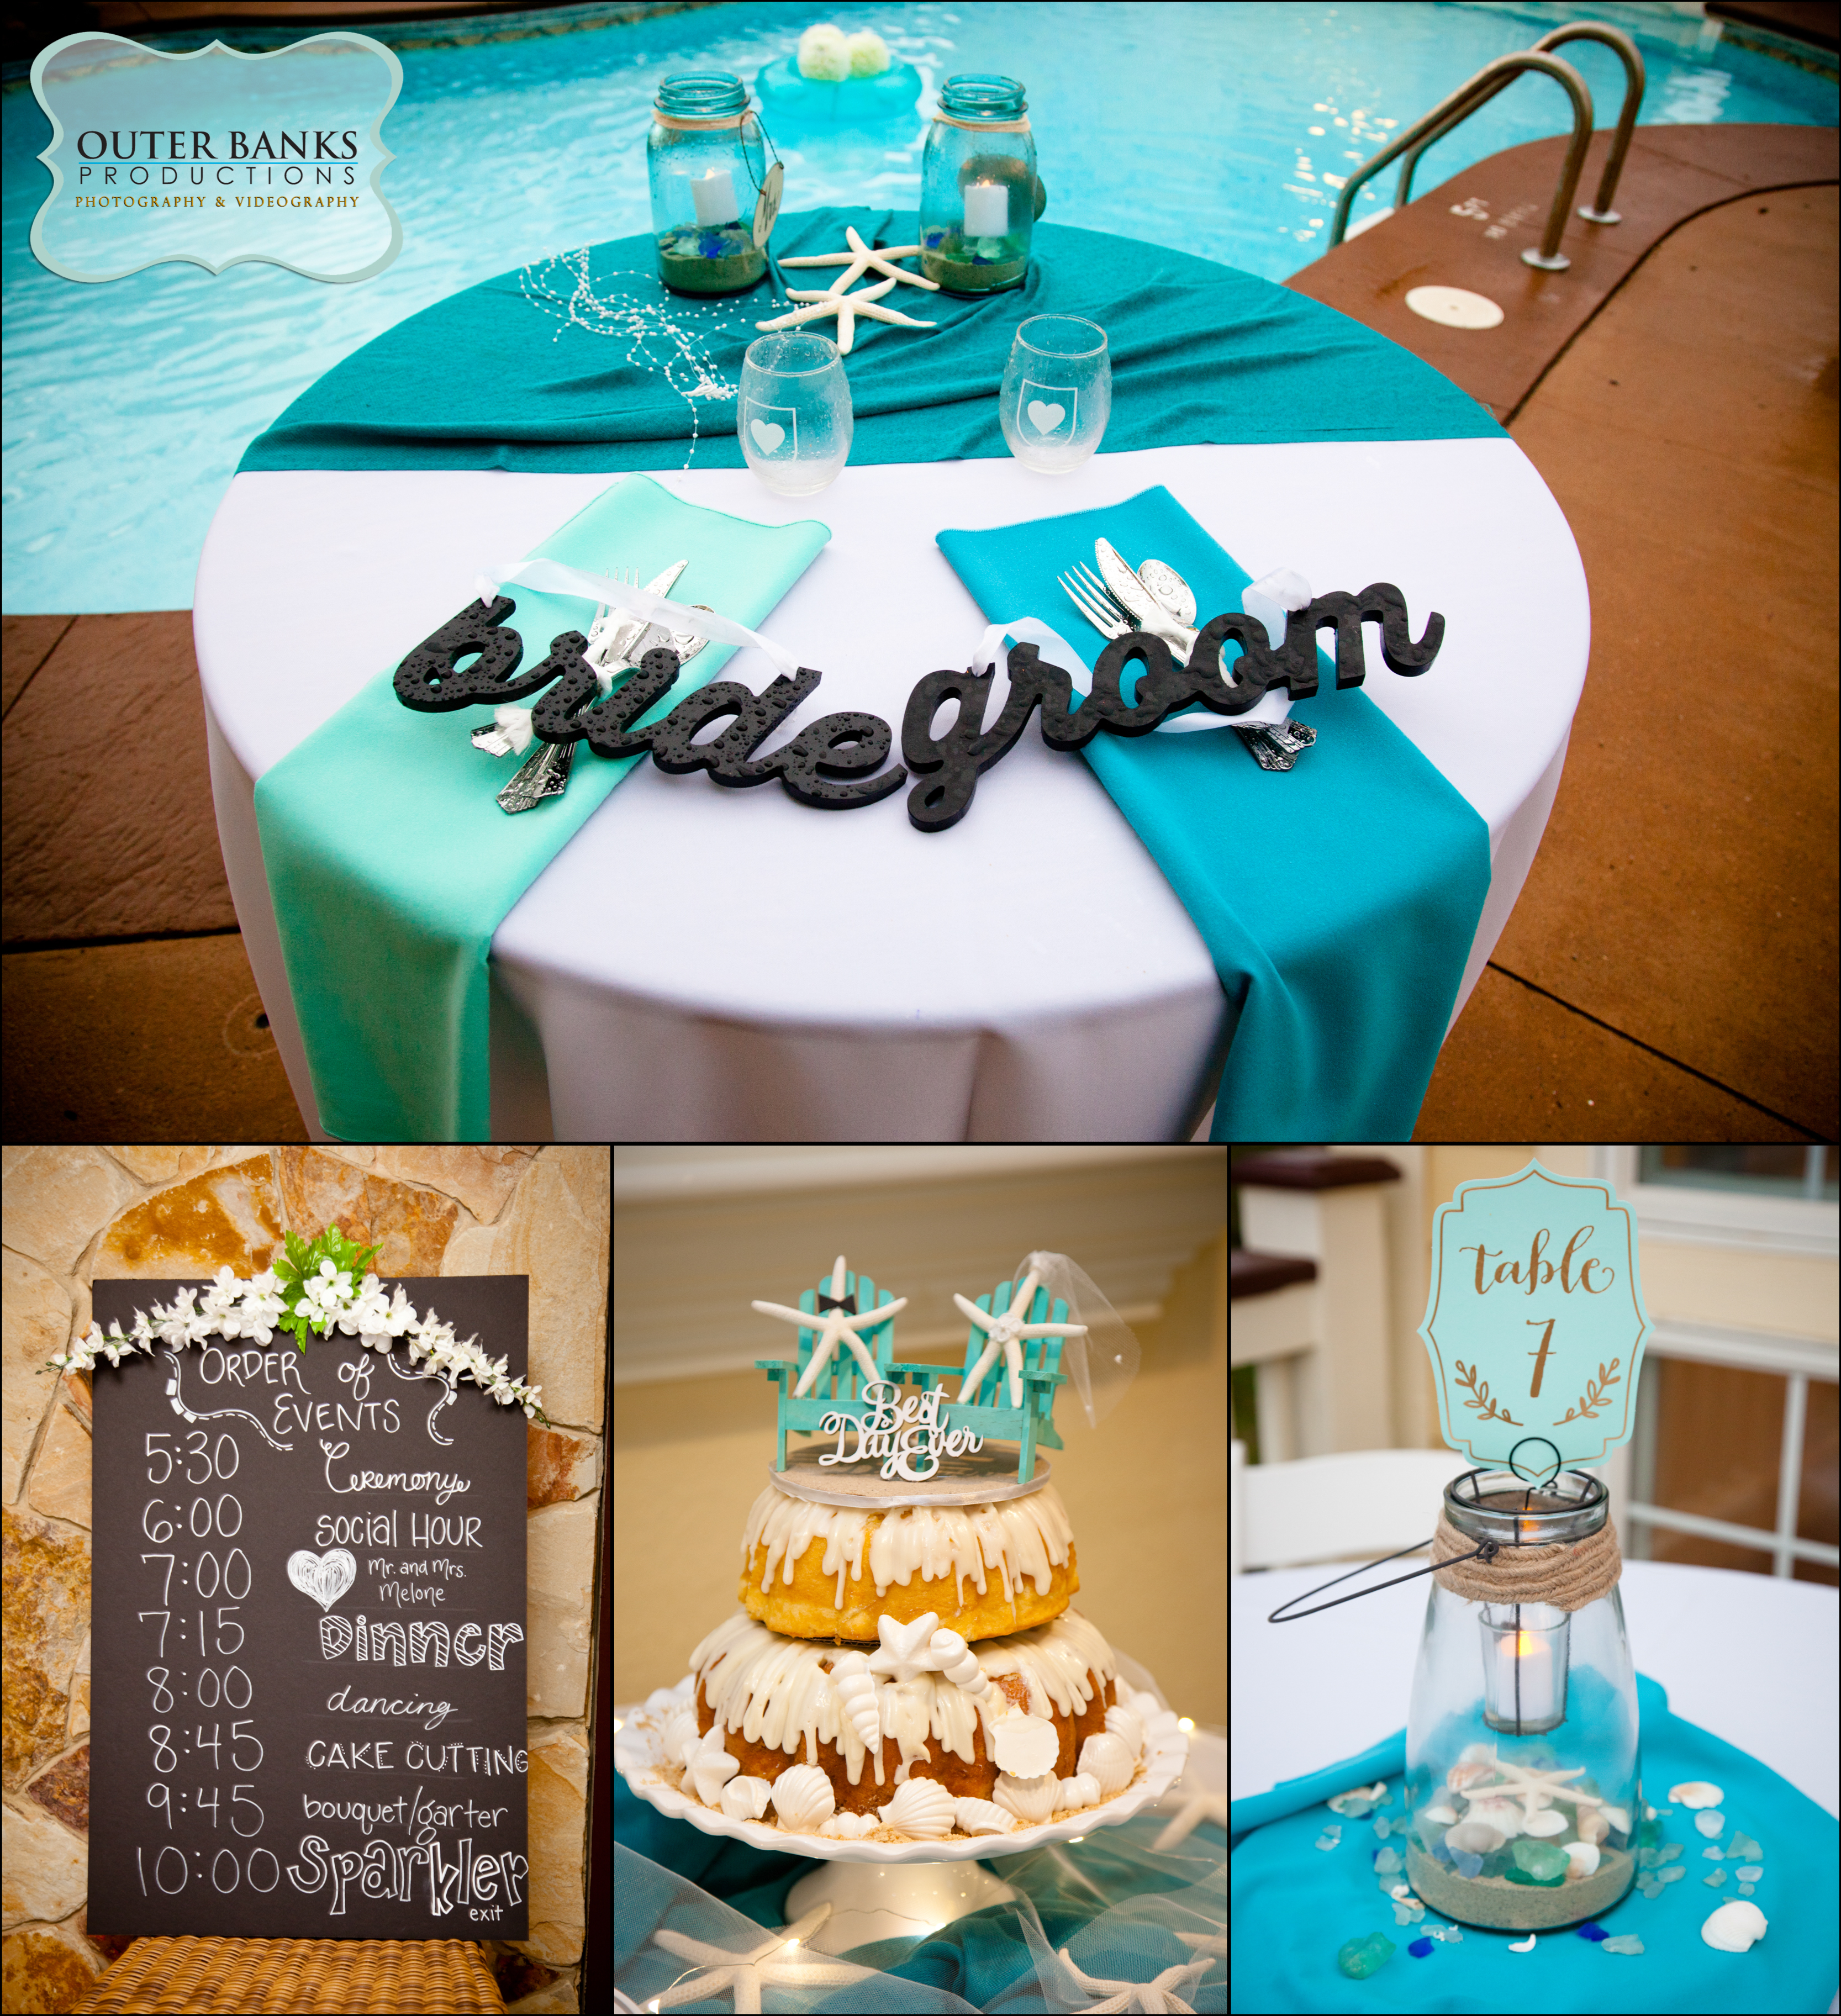 Kill Devil Hills Wedding Sydney and Stefan » Outer Banks Productions